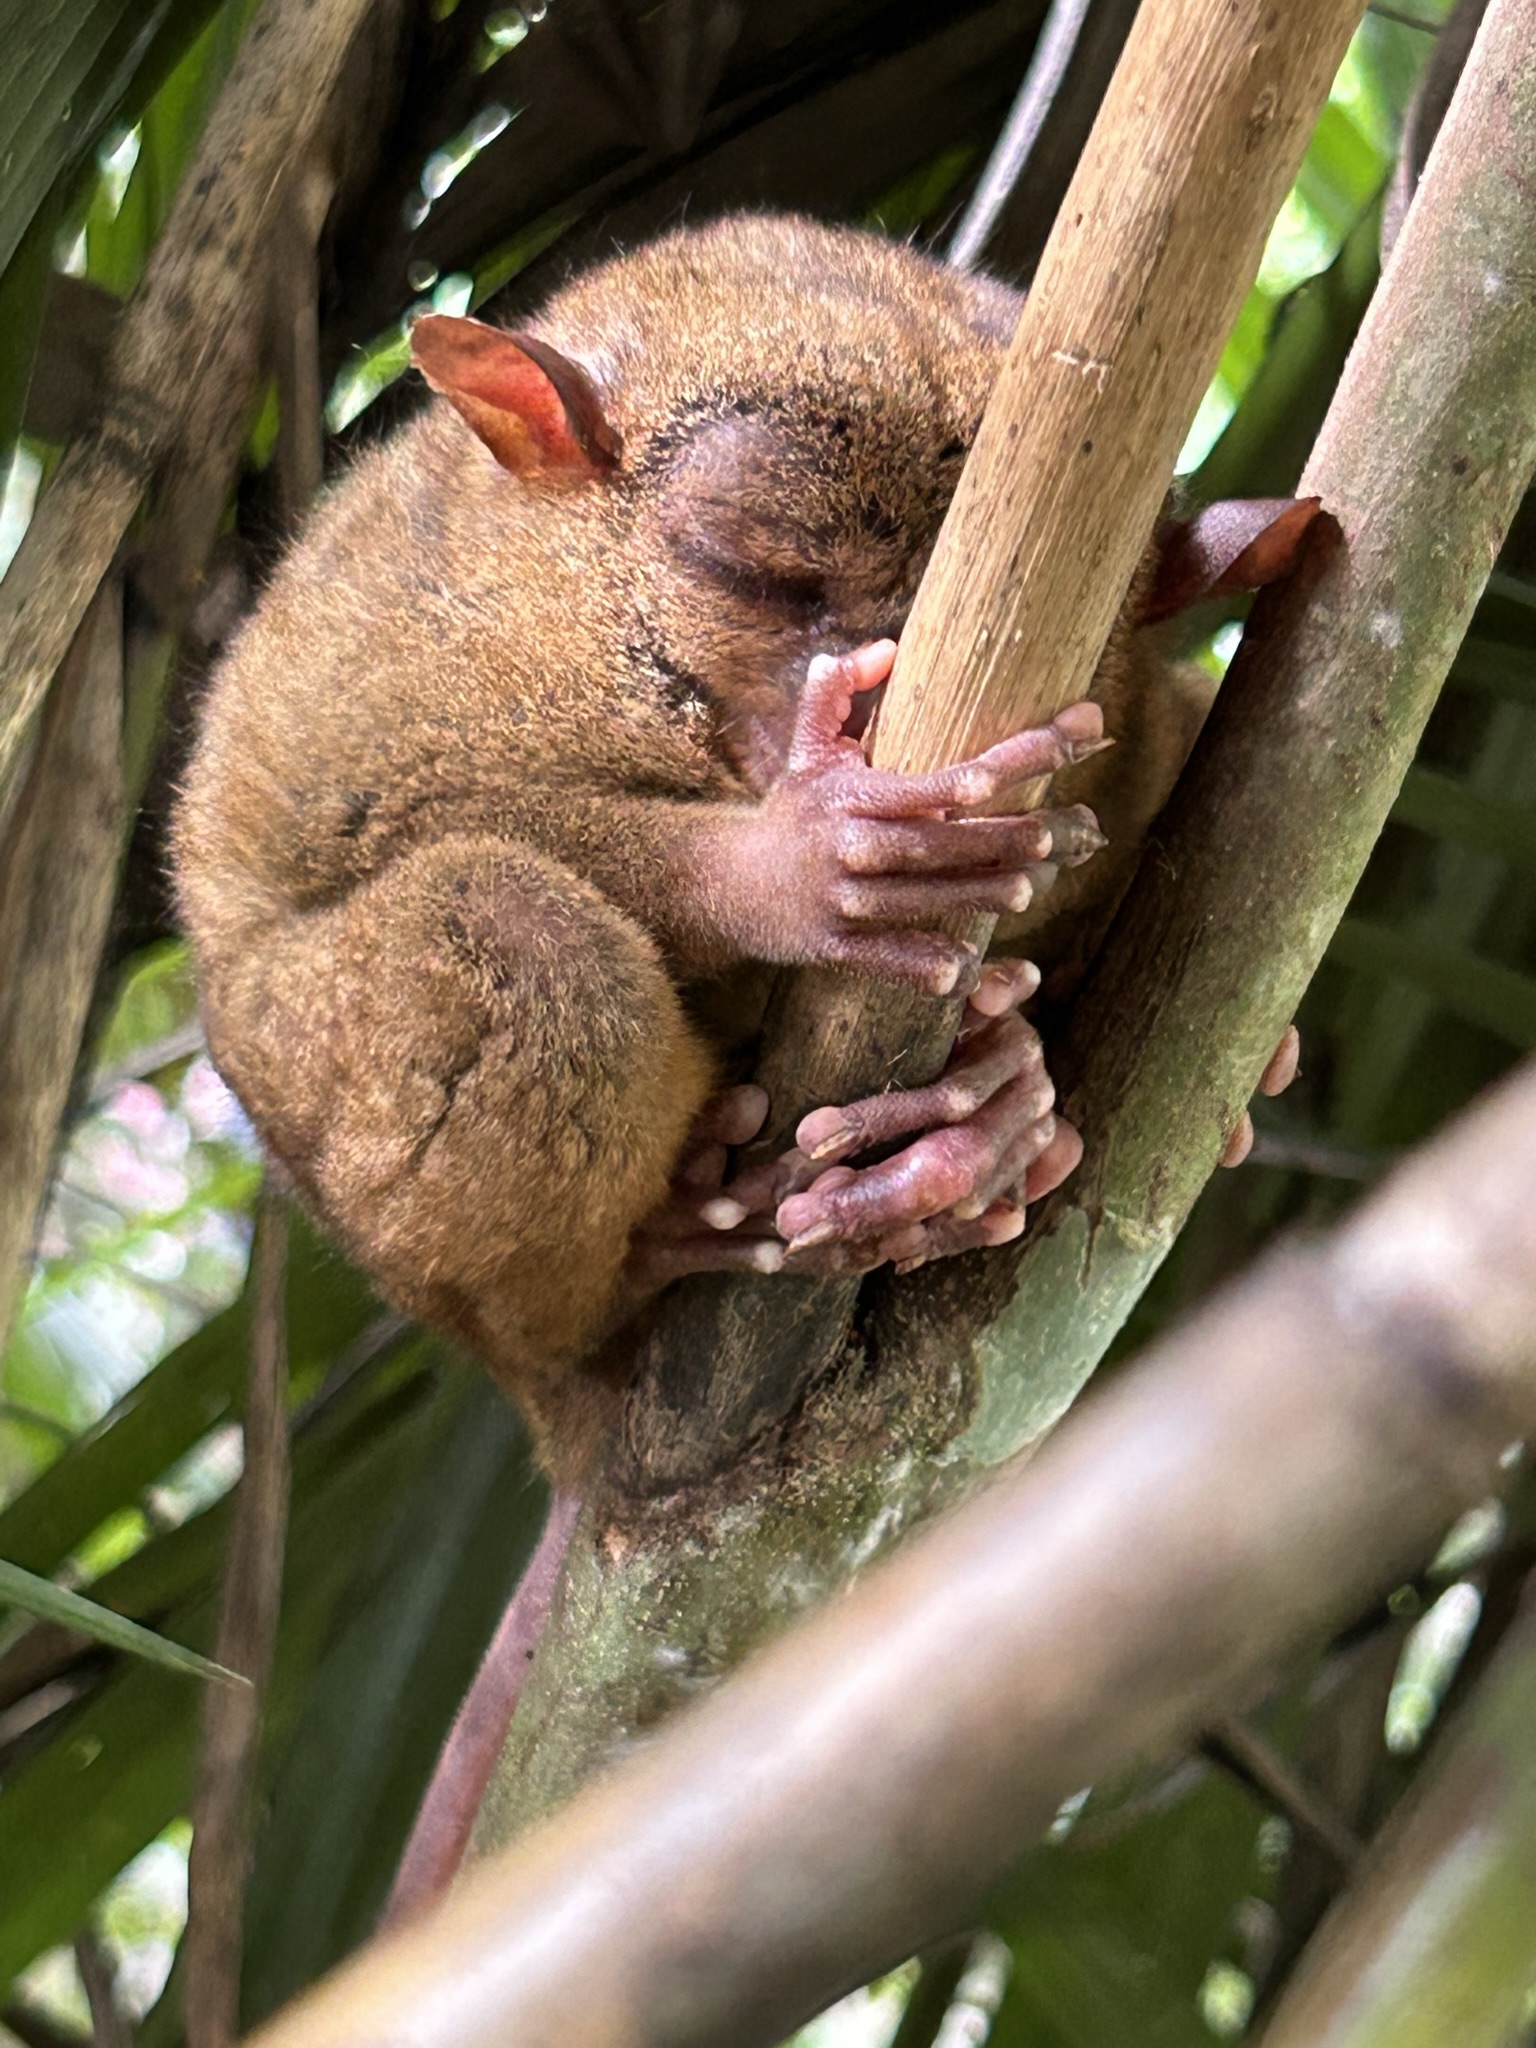 A tarsier sleeping while holding on a tree branch.